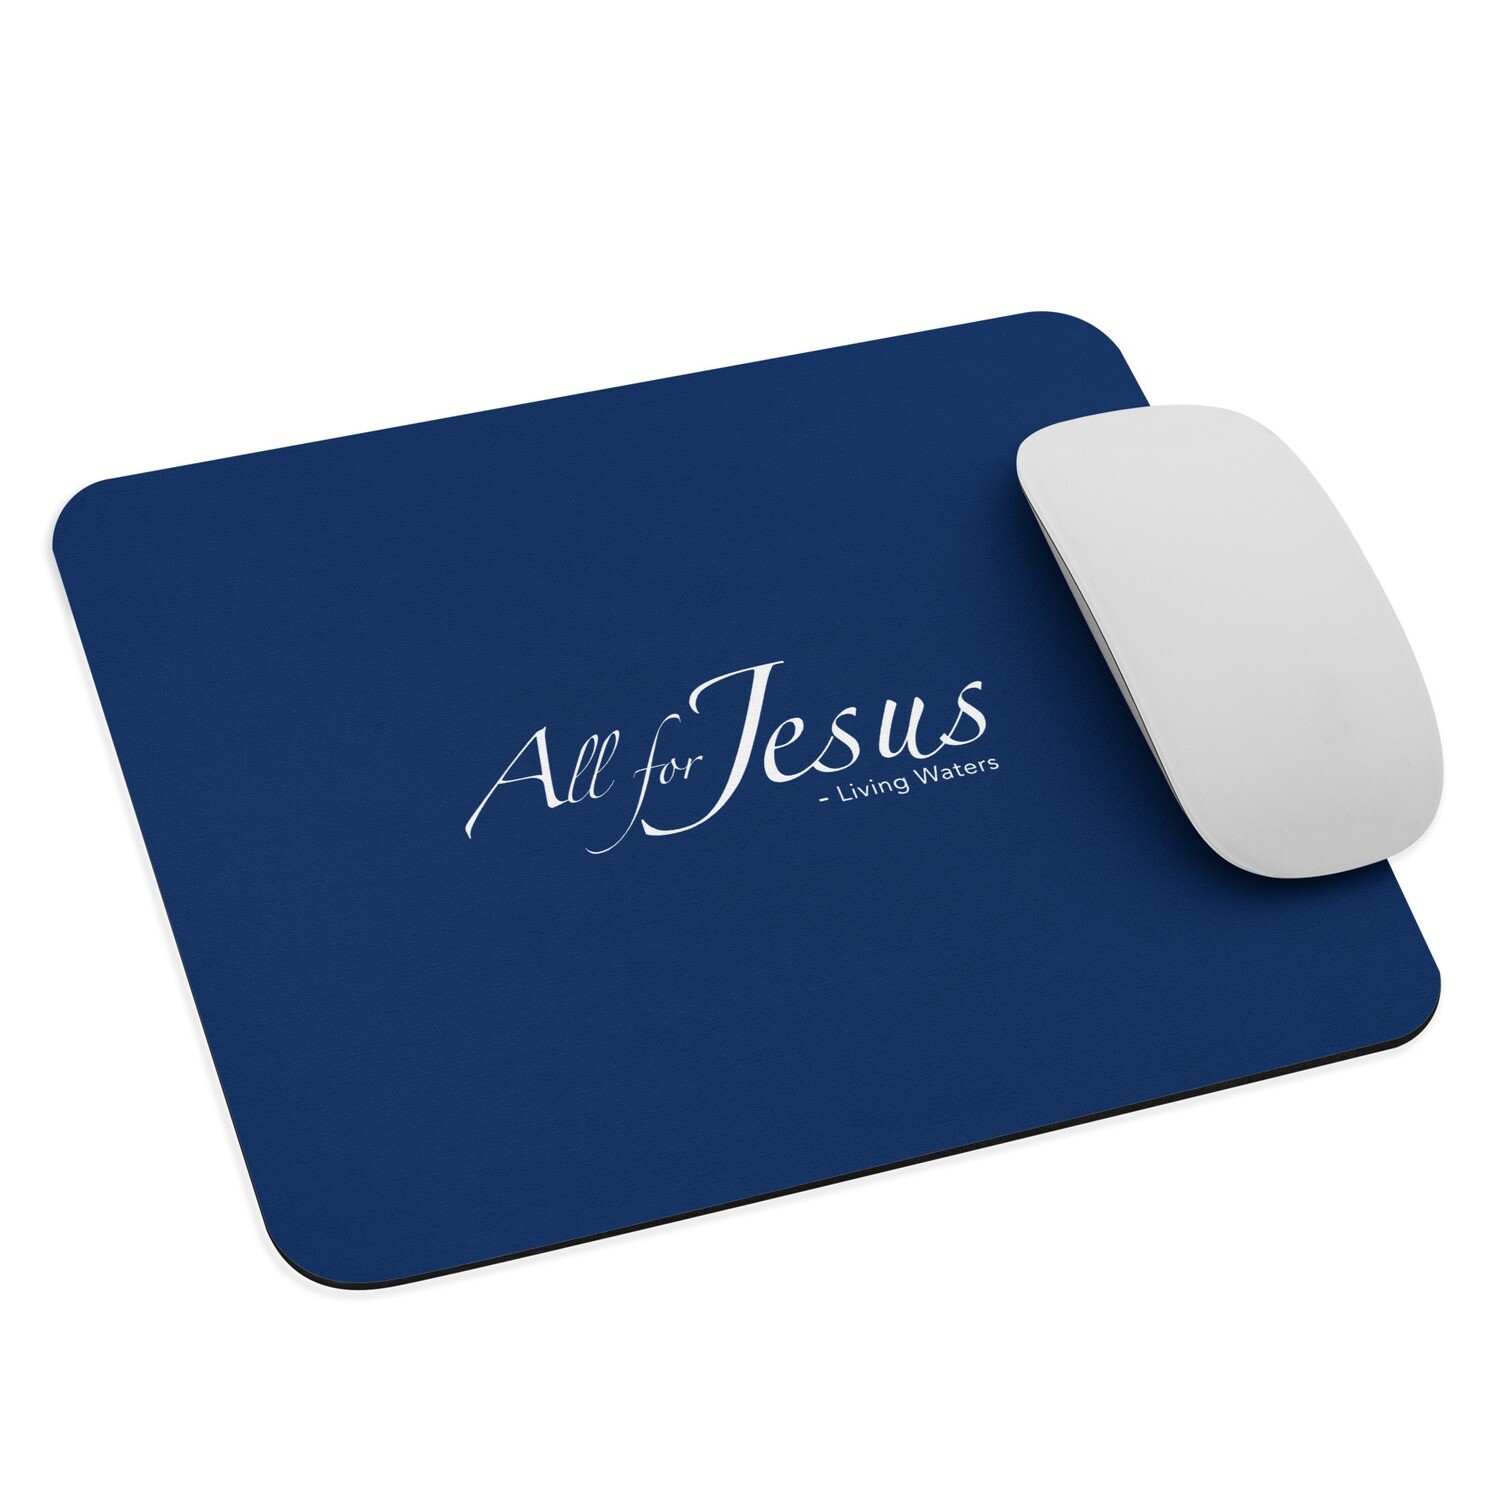 All for Jesus - mouse pad